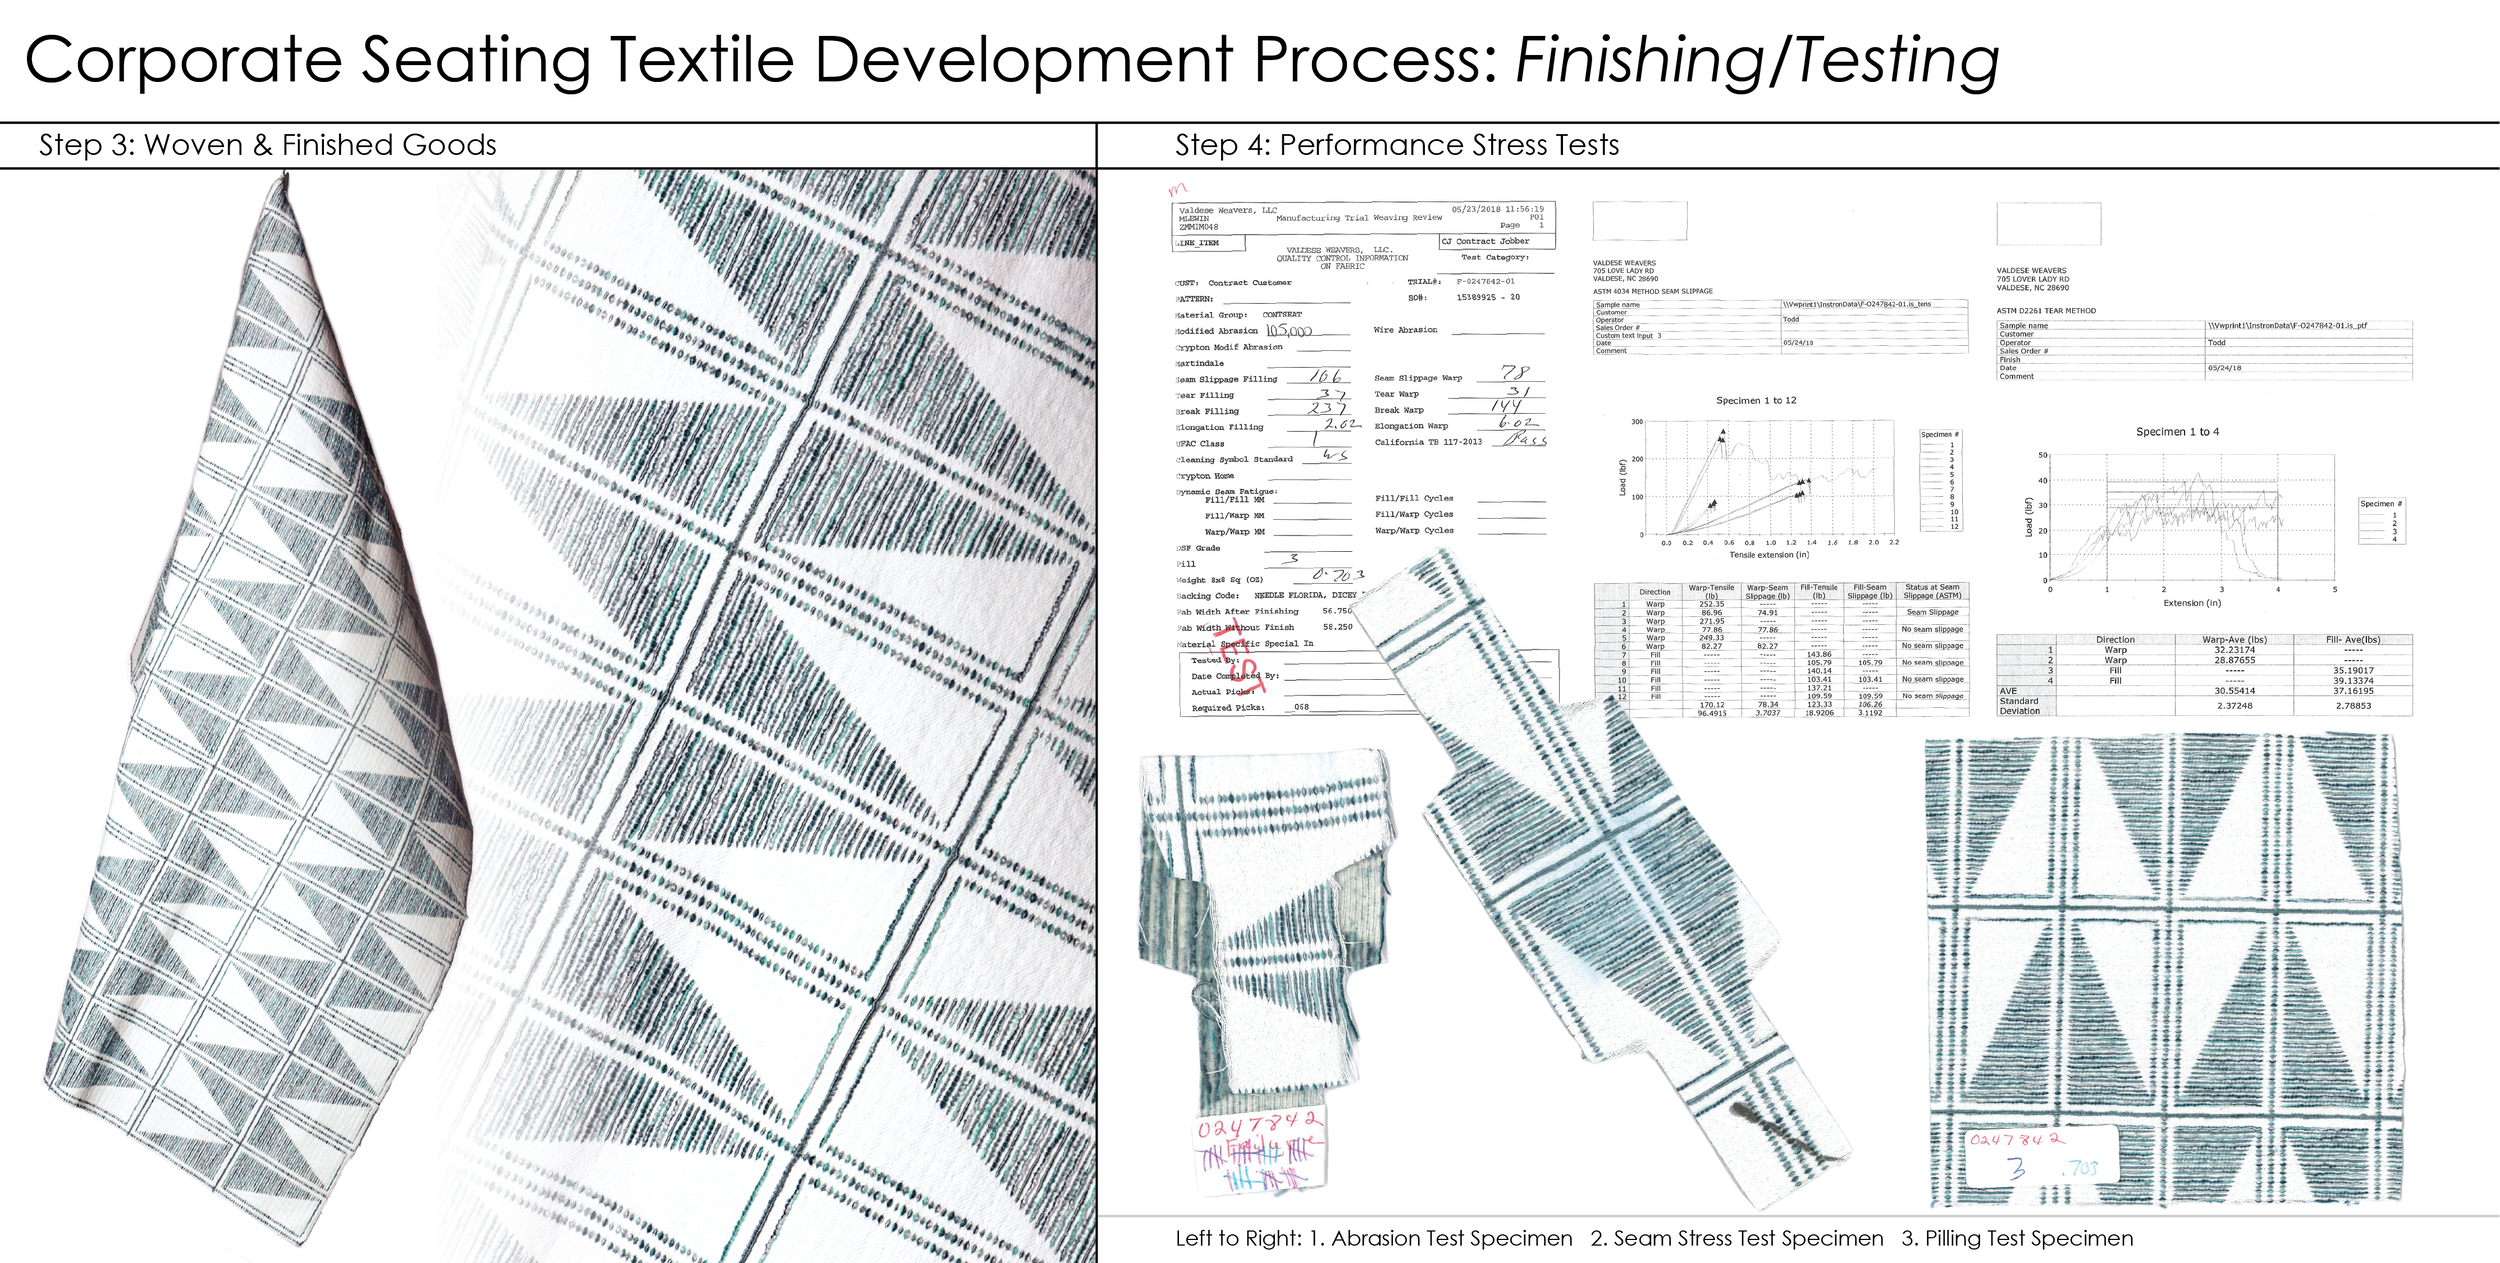 8. Corporate Seating Textile Development Process 2-01.png